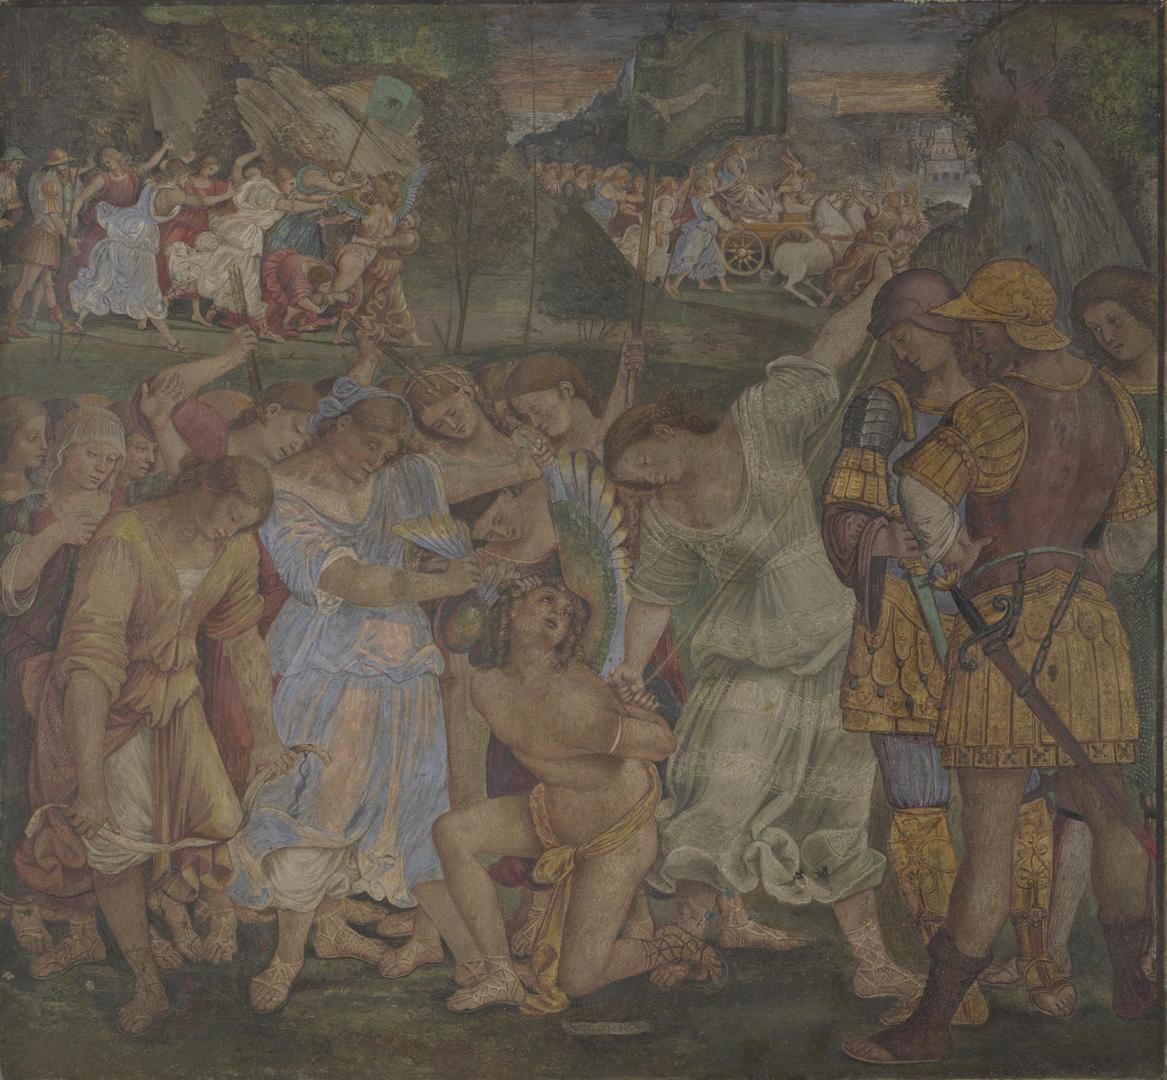 Luca Signorelli, Love Defeated and the Triumph of Chastity (c. 1509; fresco transported on canvas, 125.7 x 133.4 cm; London, National Gallery)